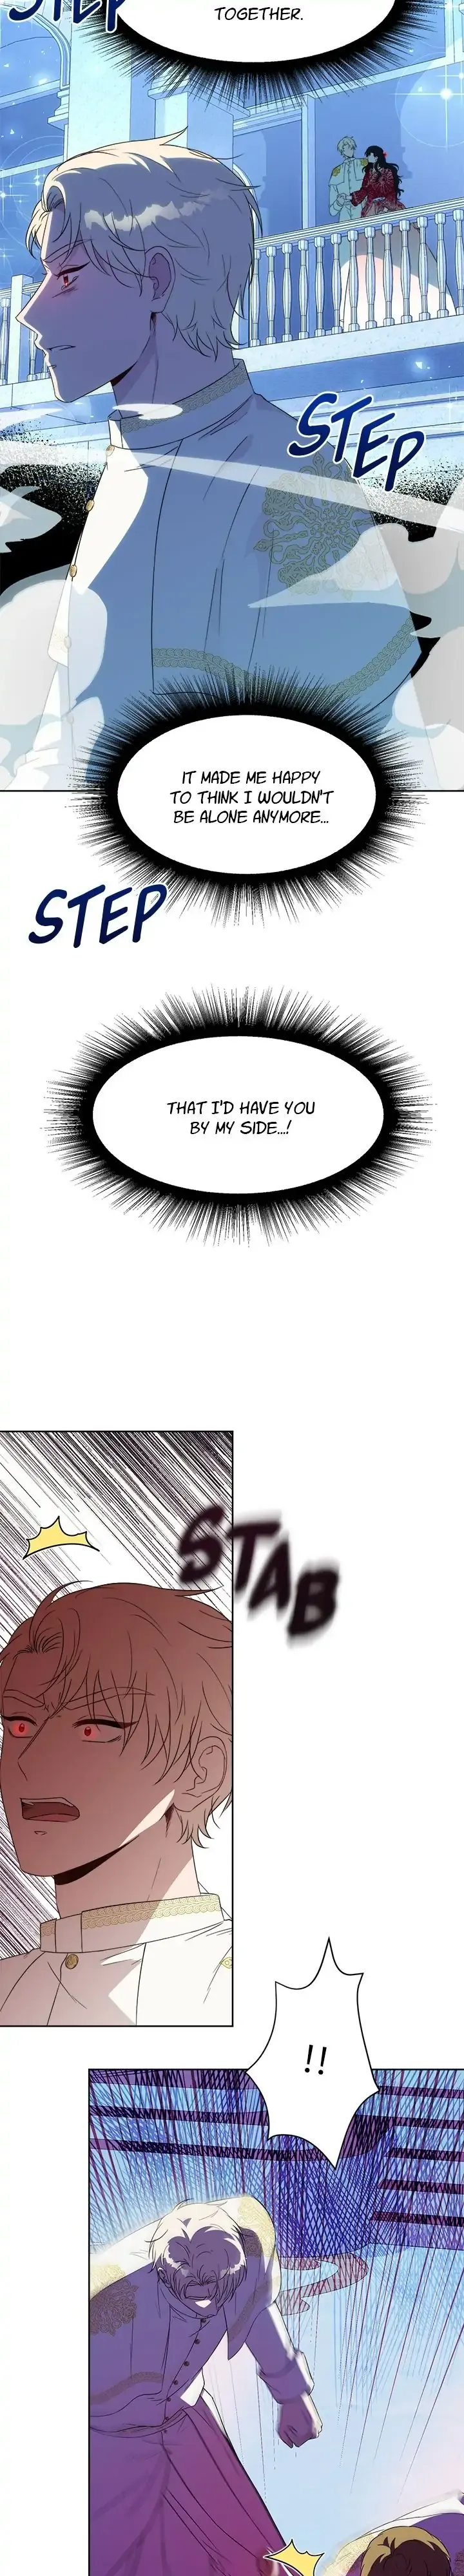 Wish to Say Farewell Chapter 100 page 5 - MangaWeebs.in